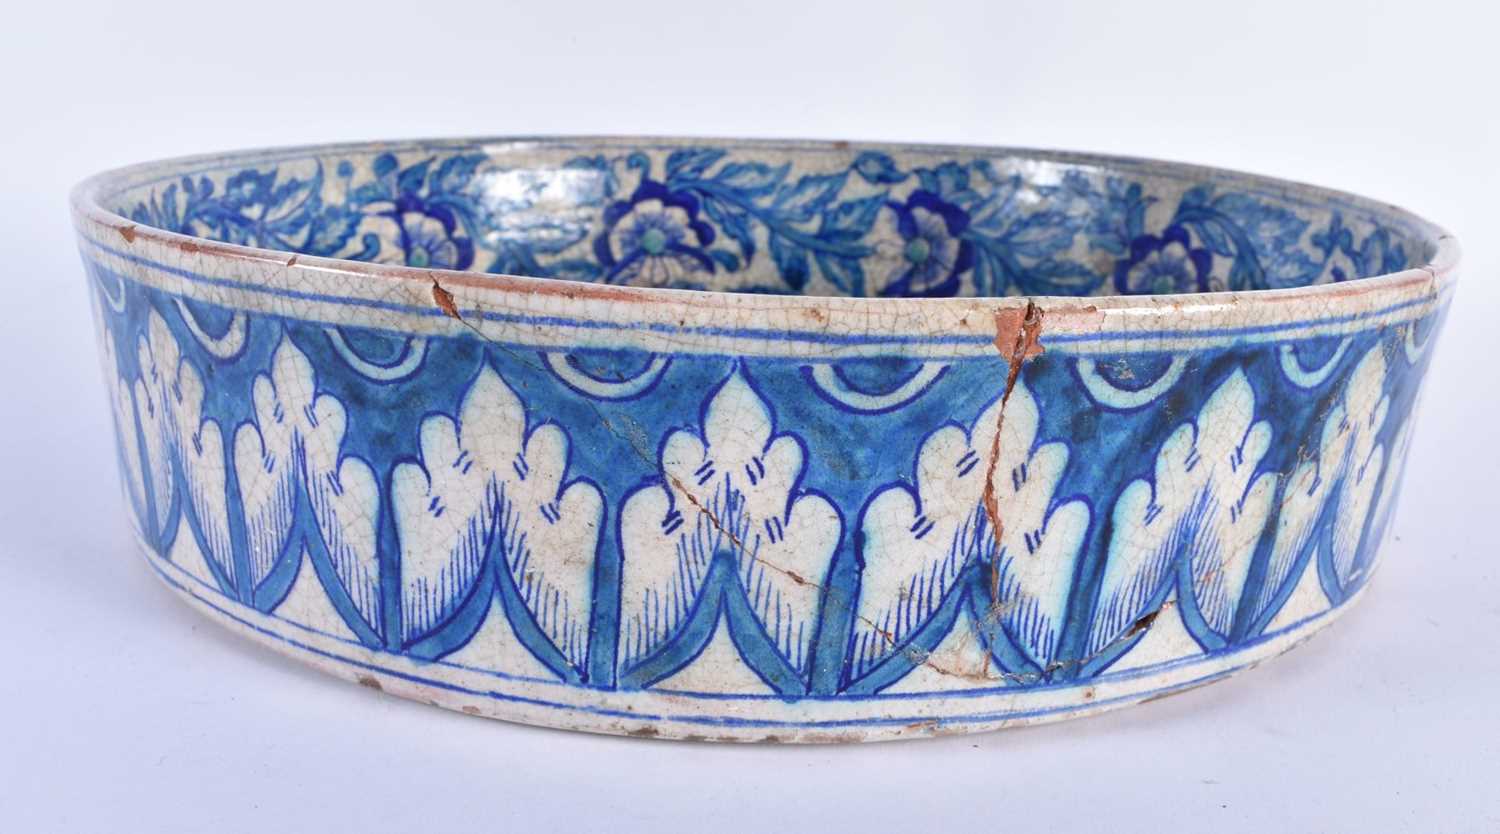 A RARE LARGE 19TH CENTURY MIDDLE EASTERN ISLAMIC IZNIK TYPE POTTERY BASIN painted with panels of - Image 4 of 5